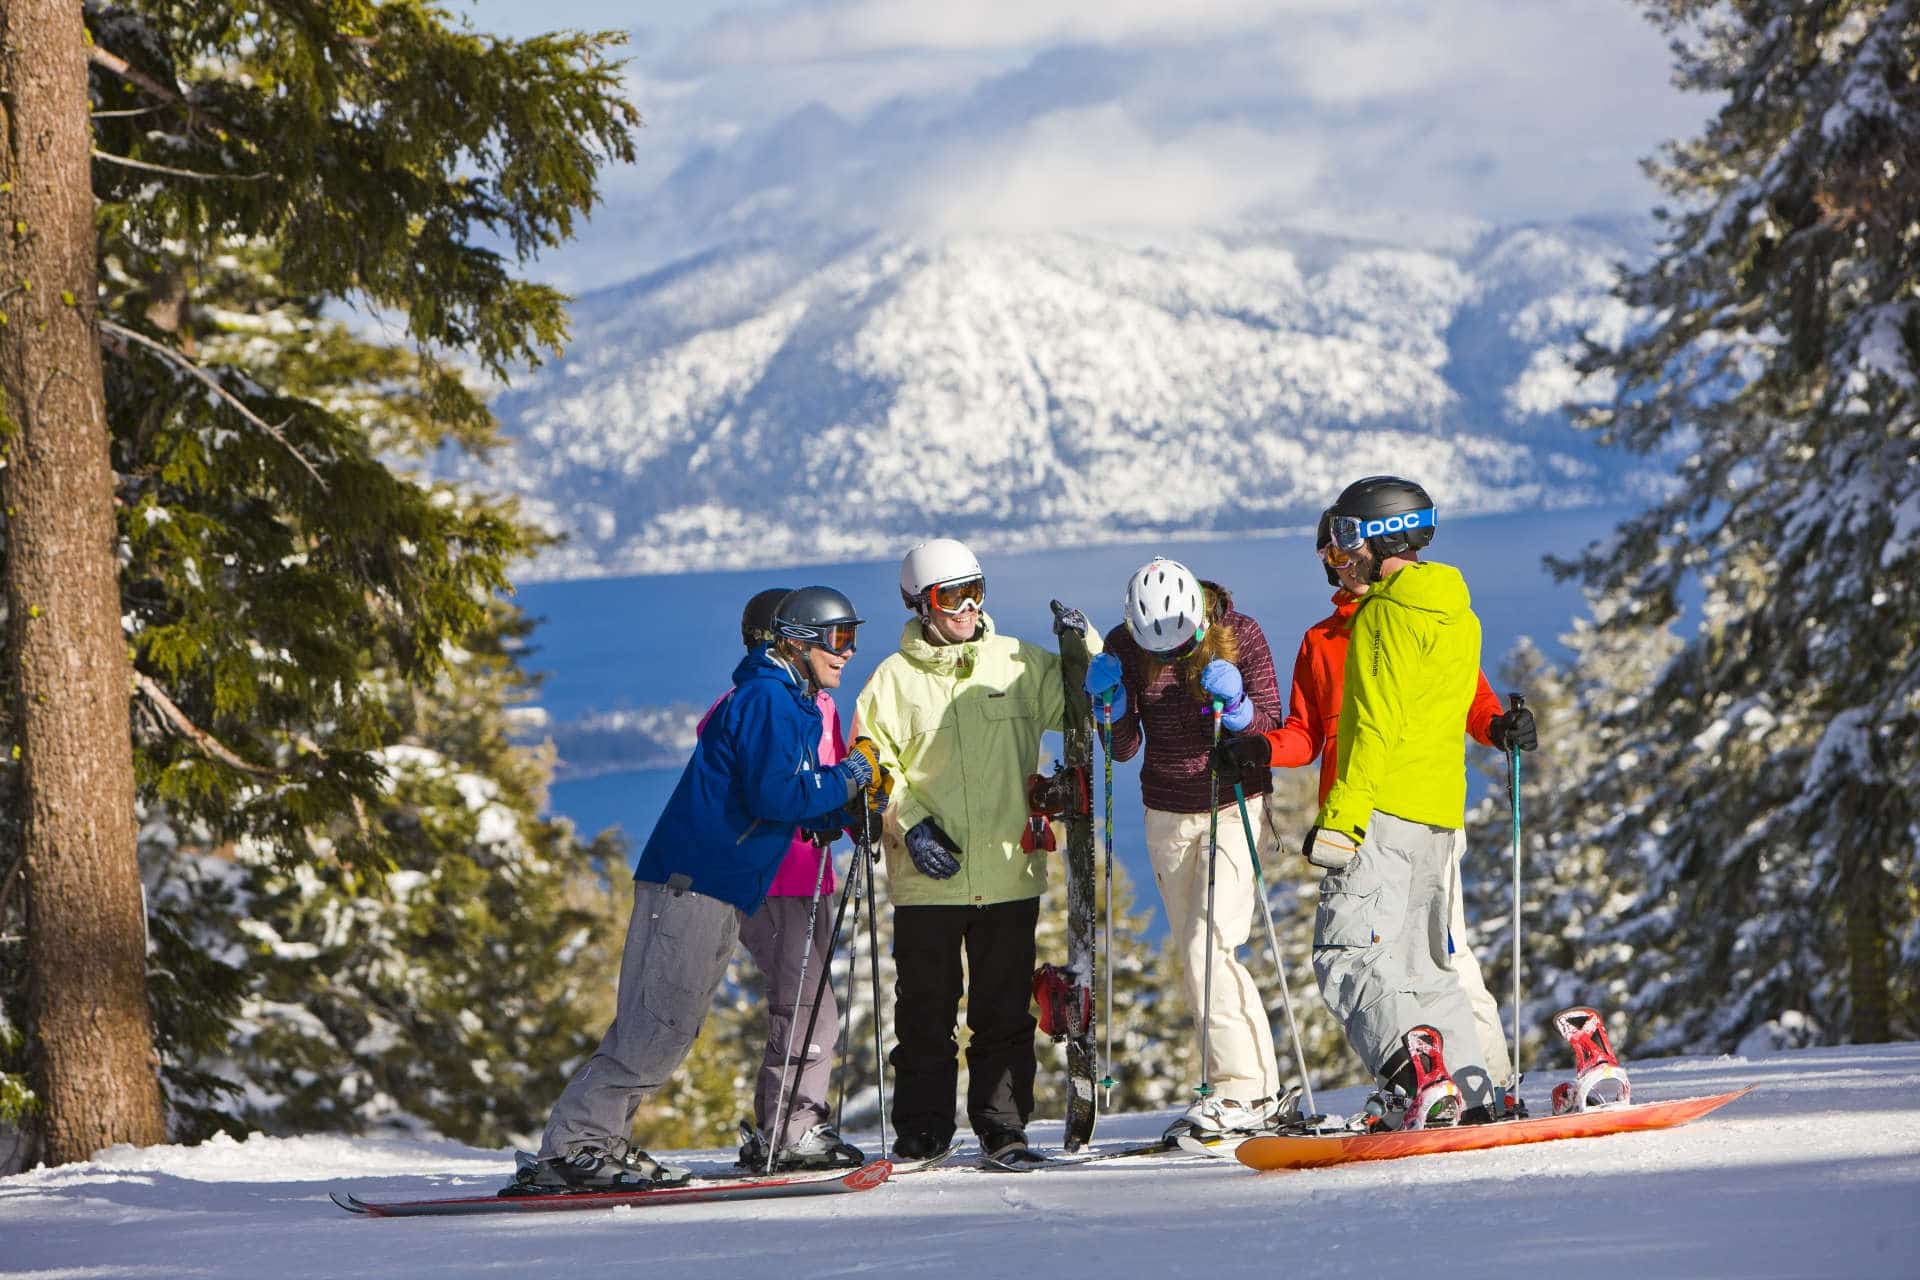 Northstar Ski Packages. Lowest Prices, Best Ski Deals Guaranteed!